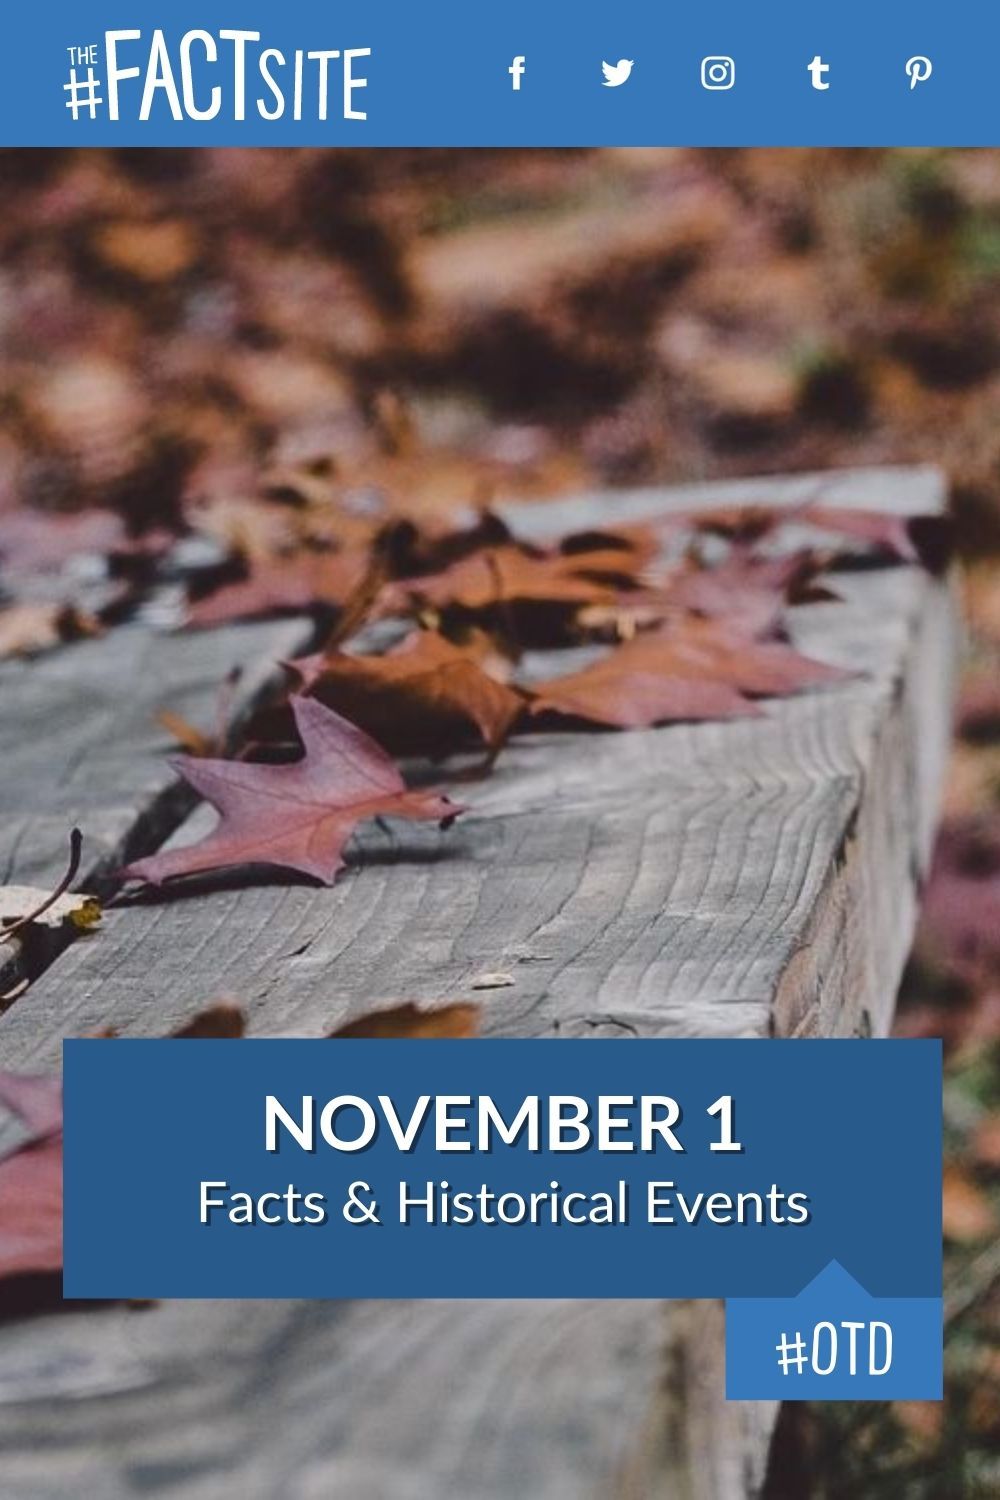 November 1 Facts & Historical Events On This Day The Fact Site